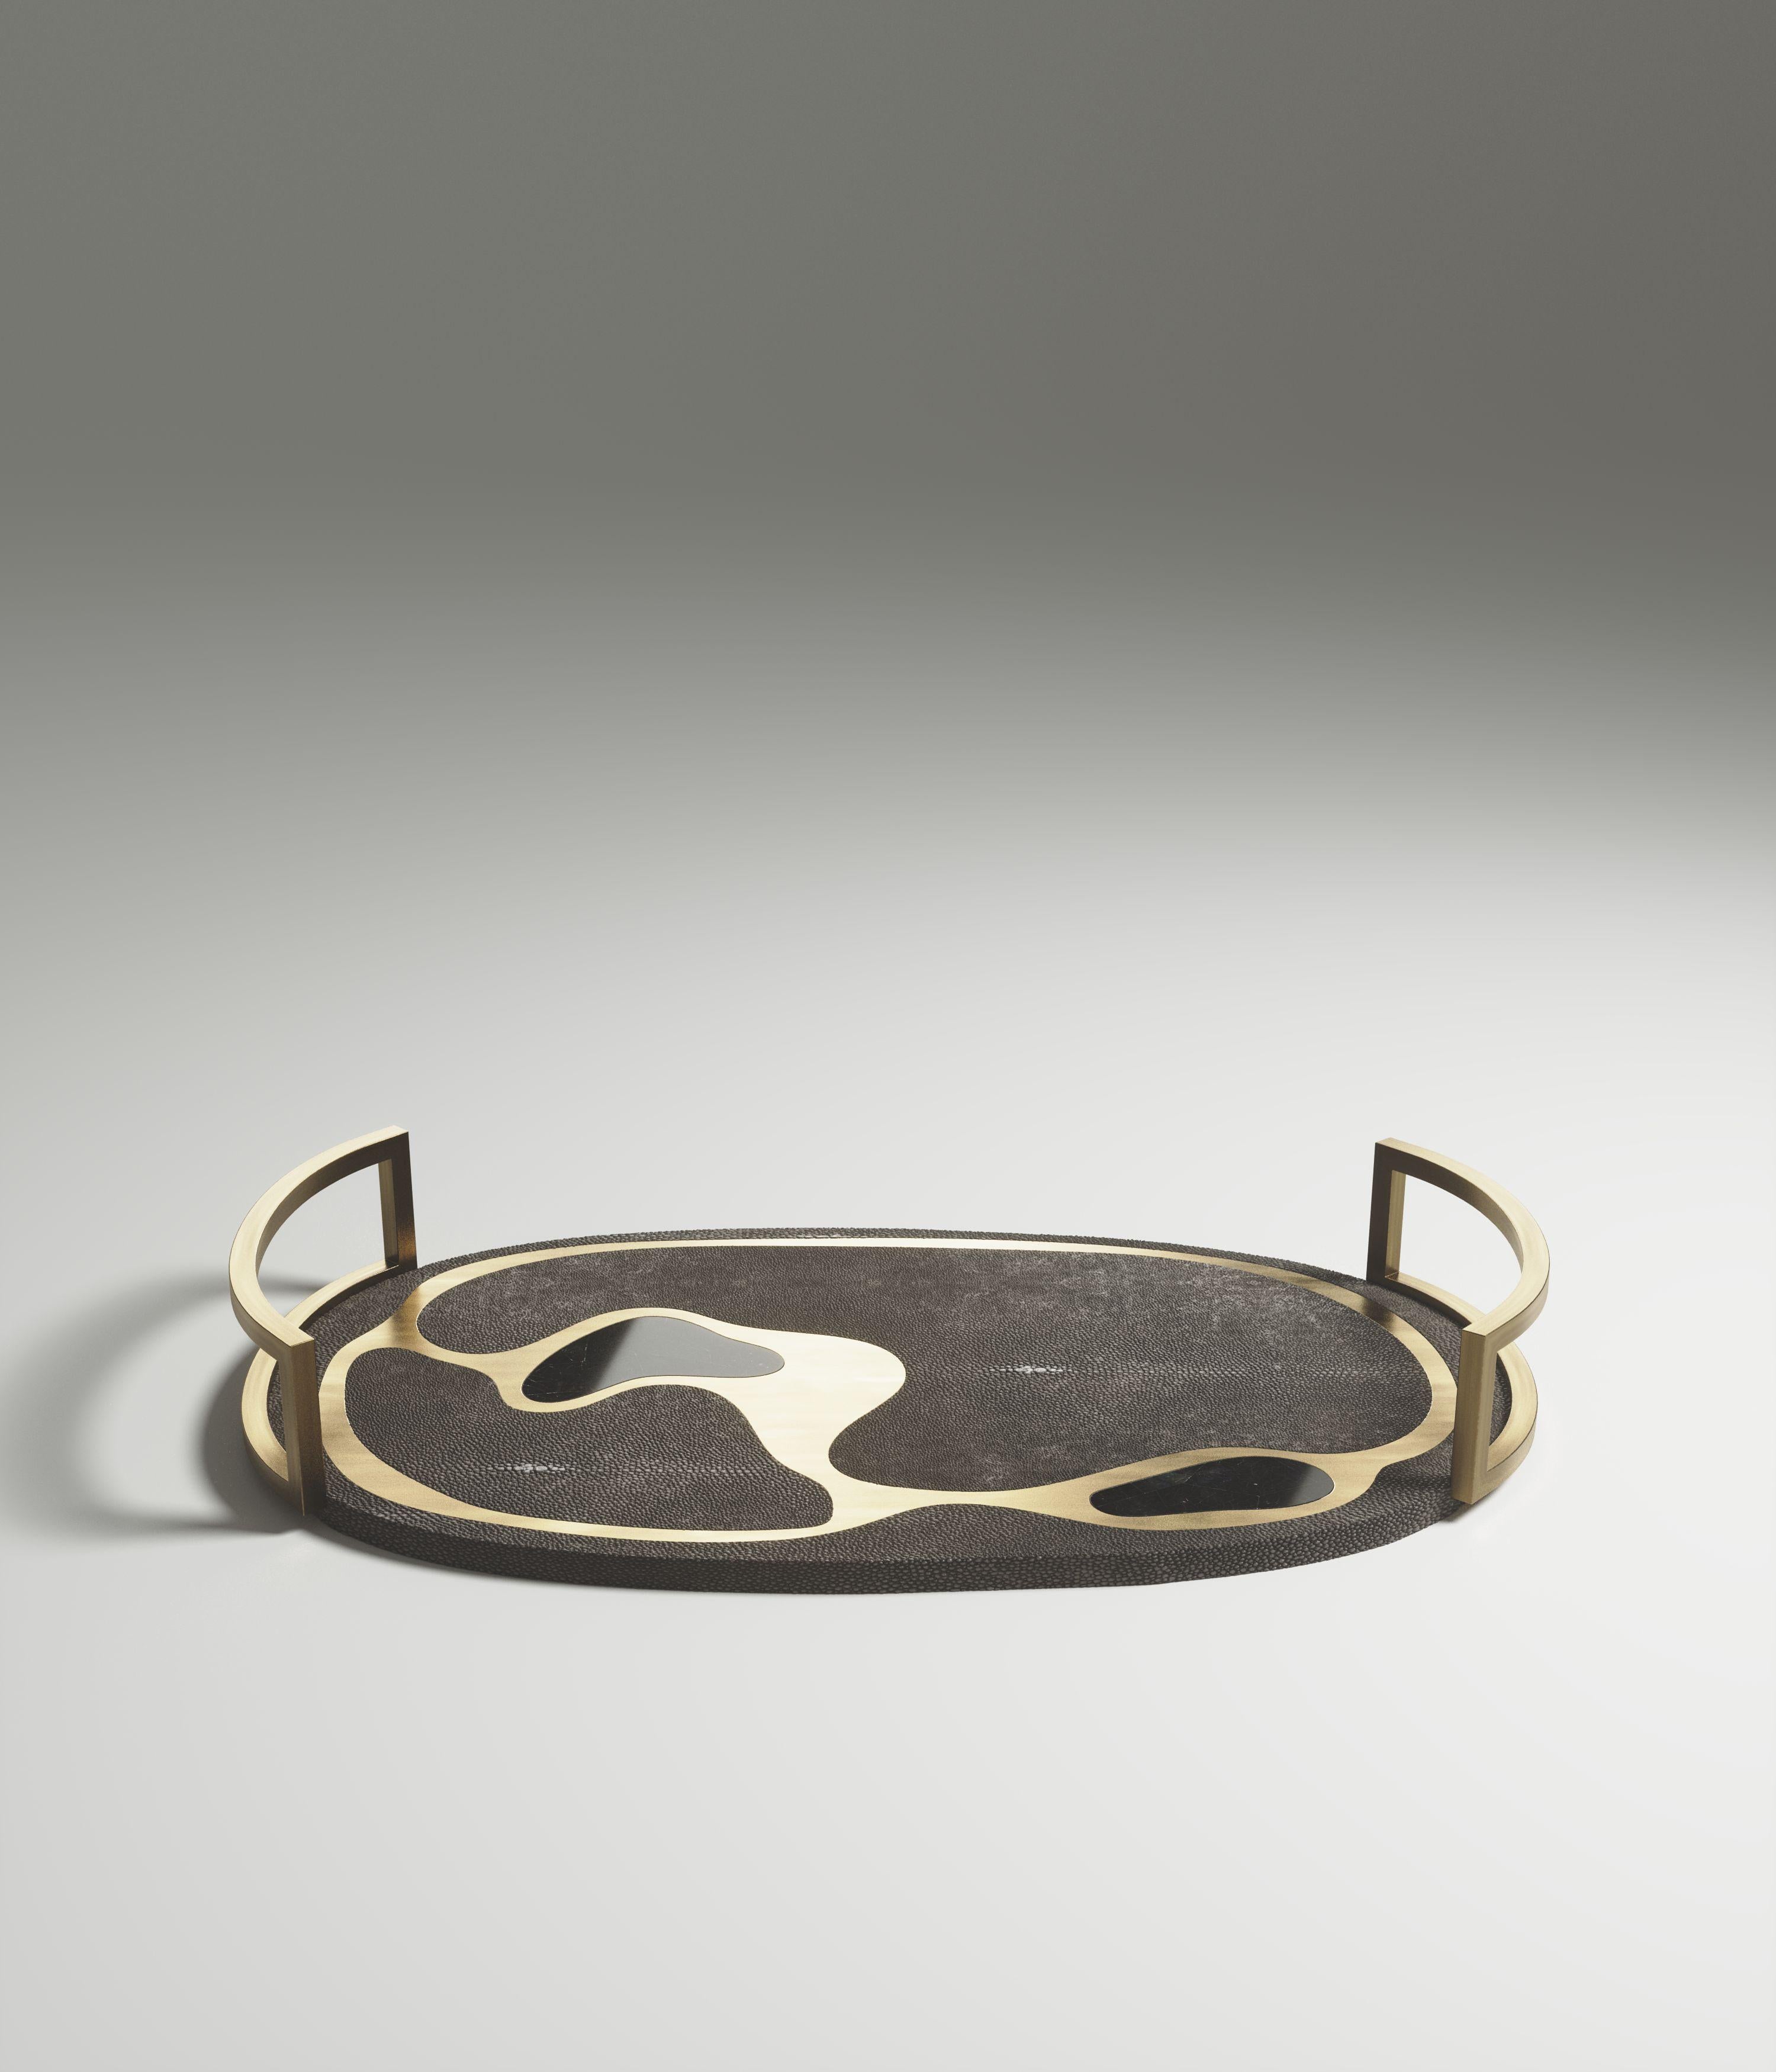 The Mask Oval Tray by Kifu Paris is a versatile and organic piece. The amorphous top and base are inlaid in a mixture of coal black shagreen, black shell and bronze-patina brass. This piece is designed by Kifu Augousti the daughter of Ria and Yiouri